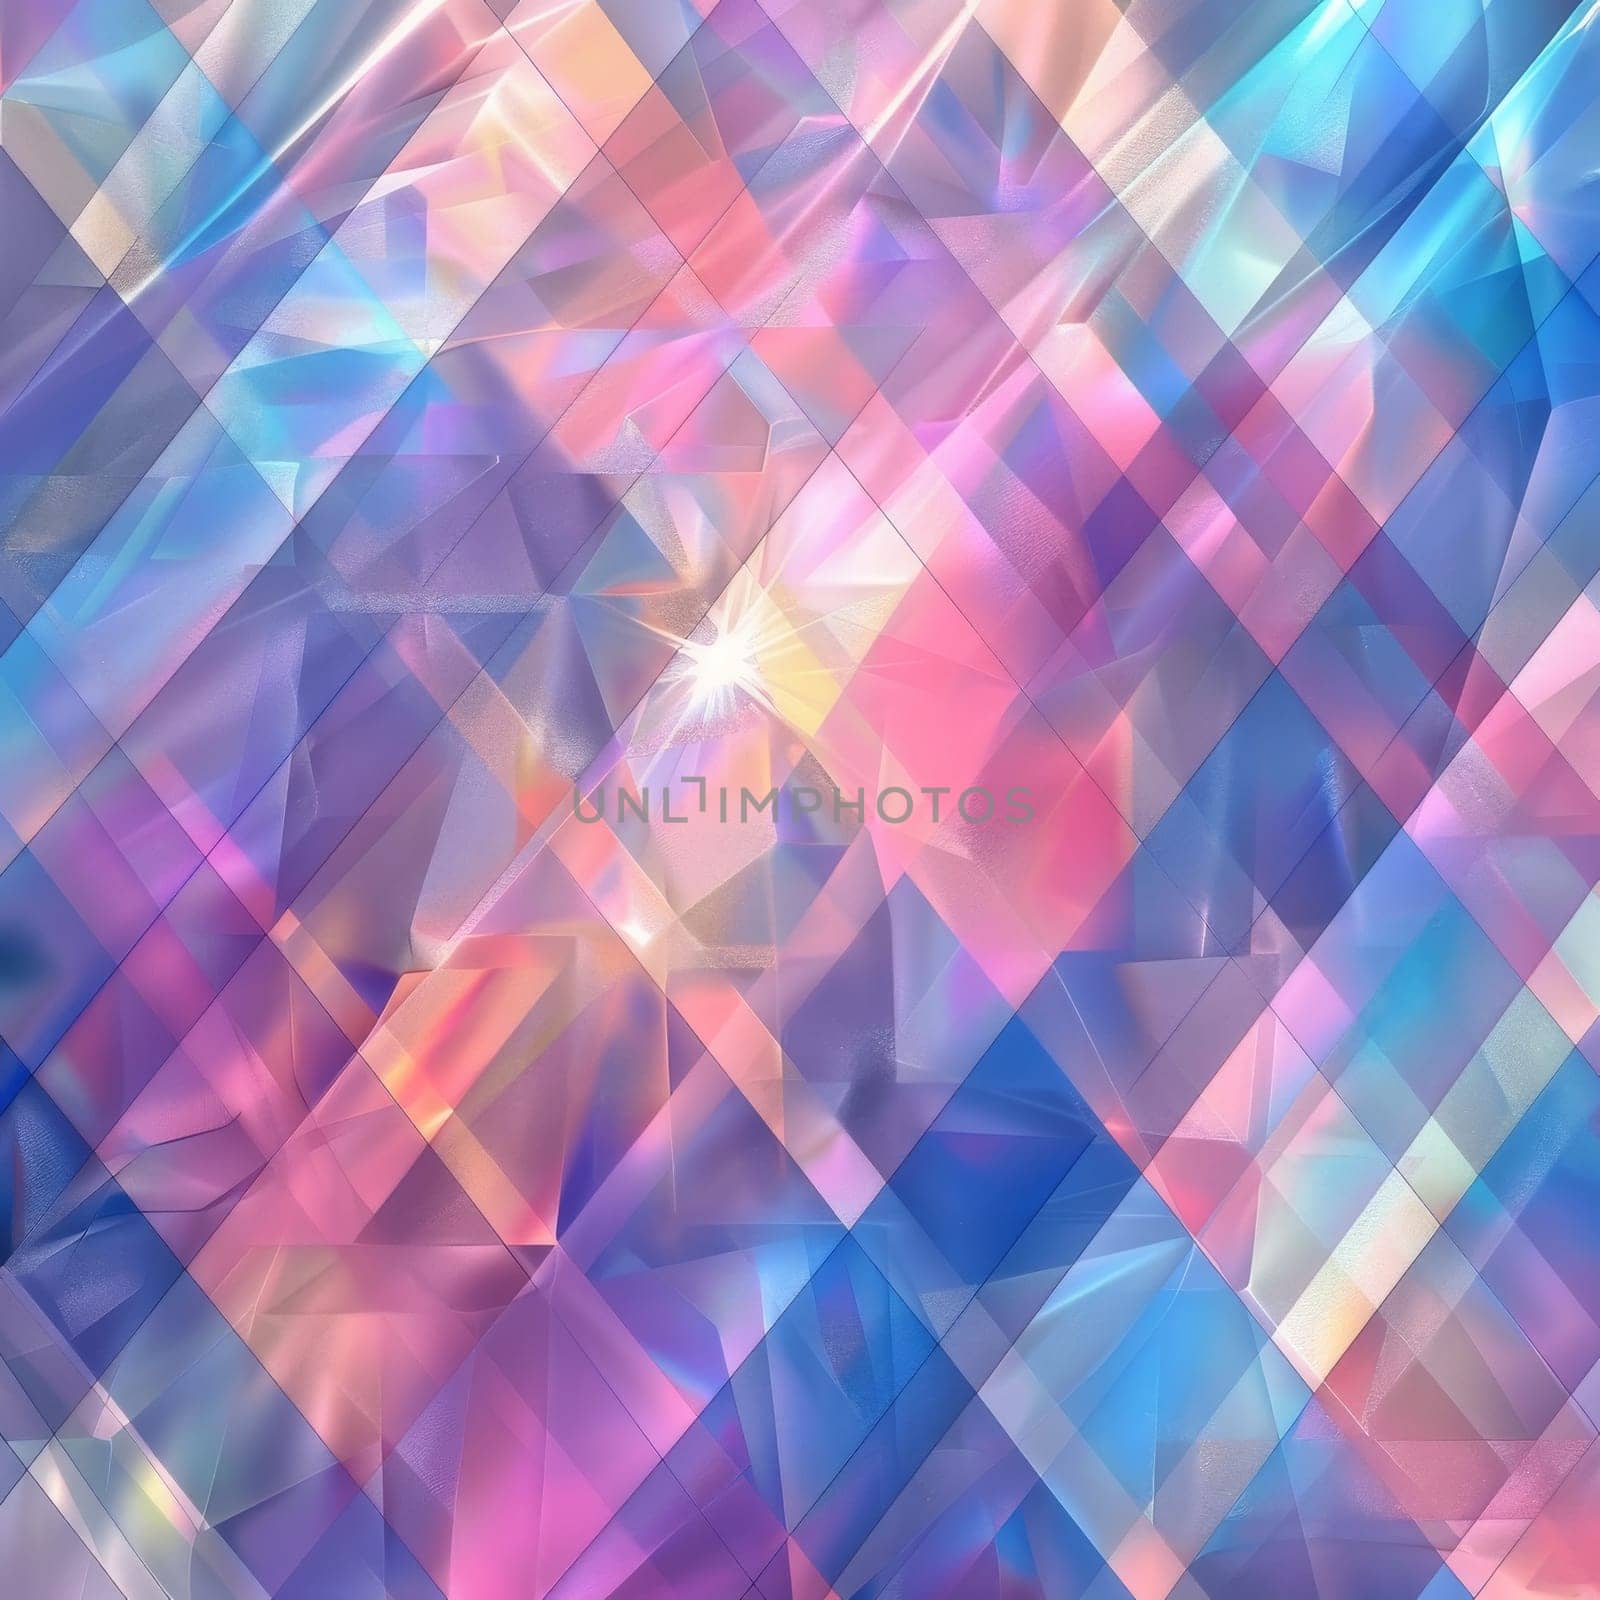 A colorful, abstract image of a diamond with bright colors and a star in the center. The diamond is made up of many small triangles, and the colors are vibrant and eye-catching